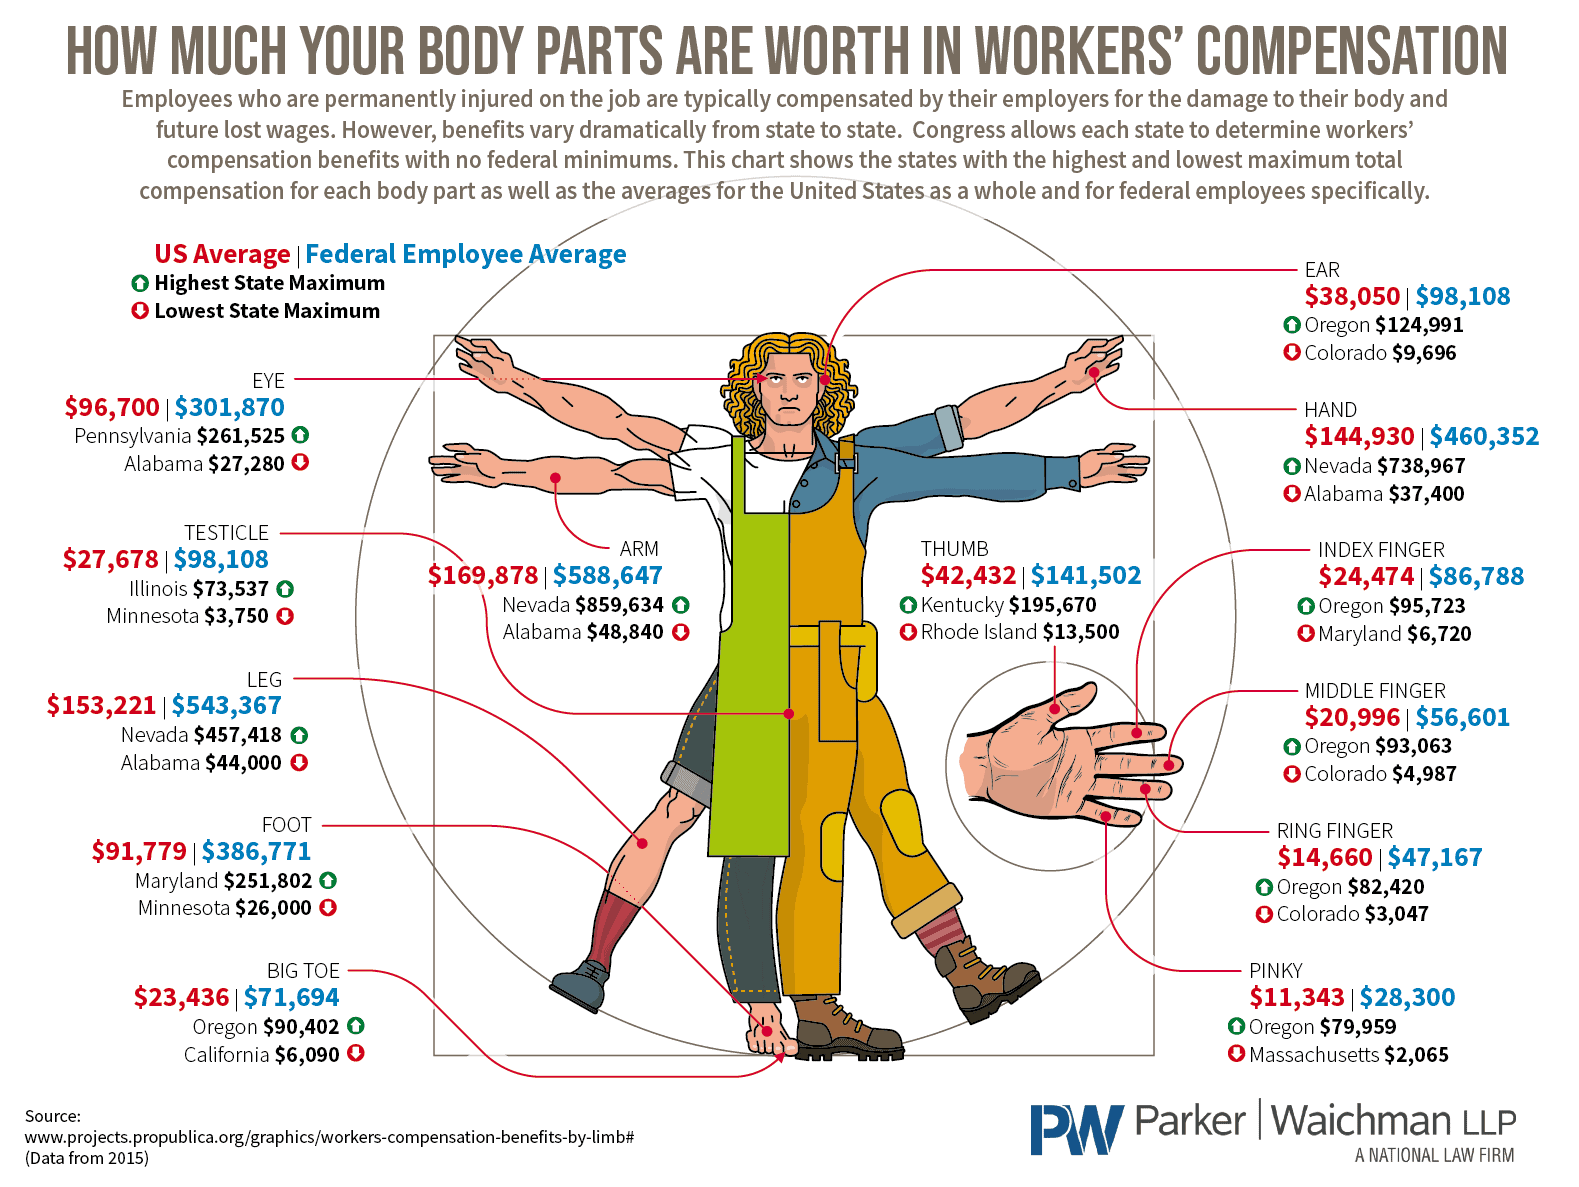 How Much Your Body Parts Are Worth in Workers’ Compensation Parker